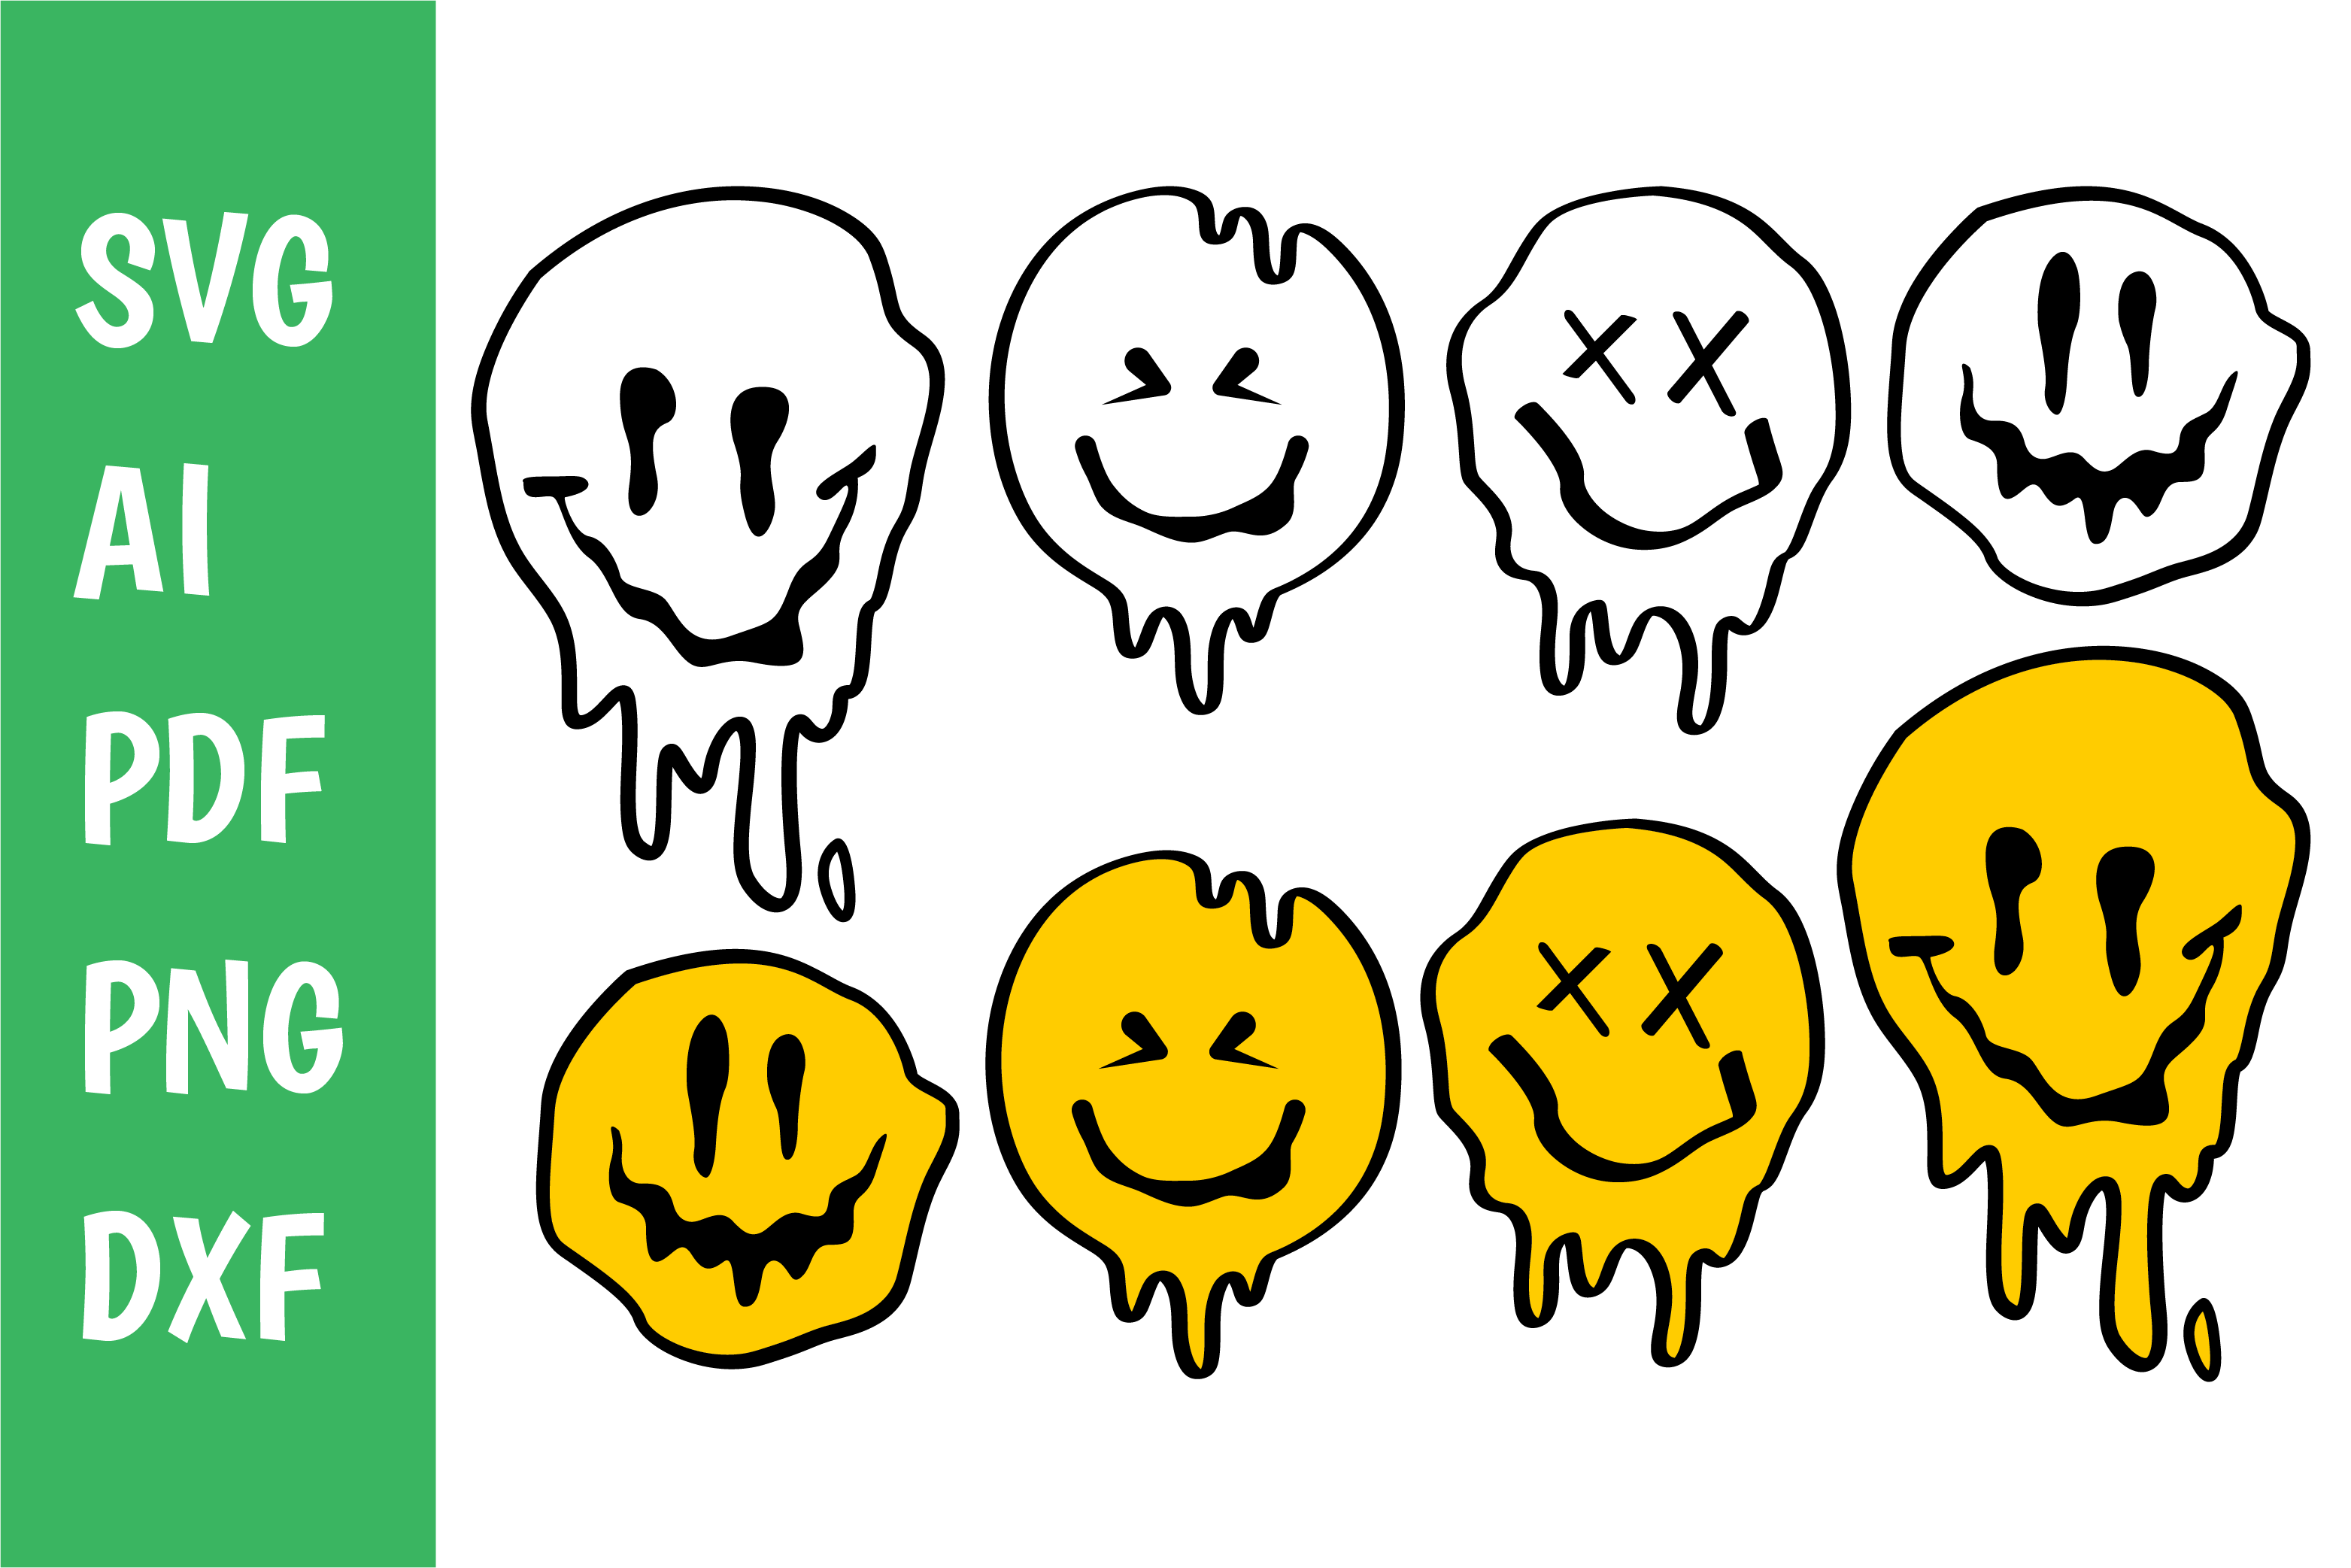 Melted Smiley Face Drip Svg  Melted Smiley Face Drip Png